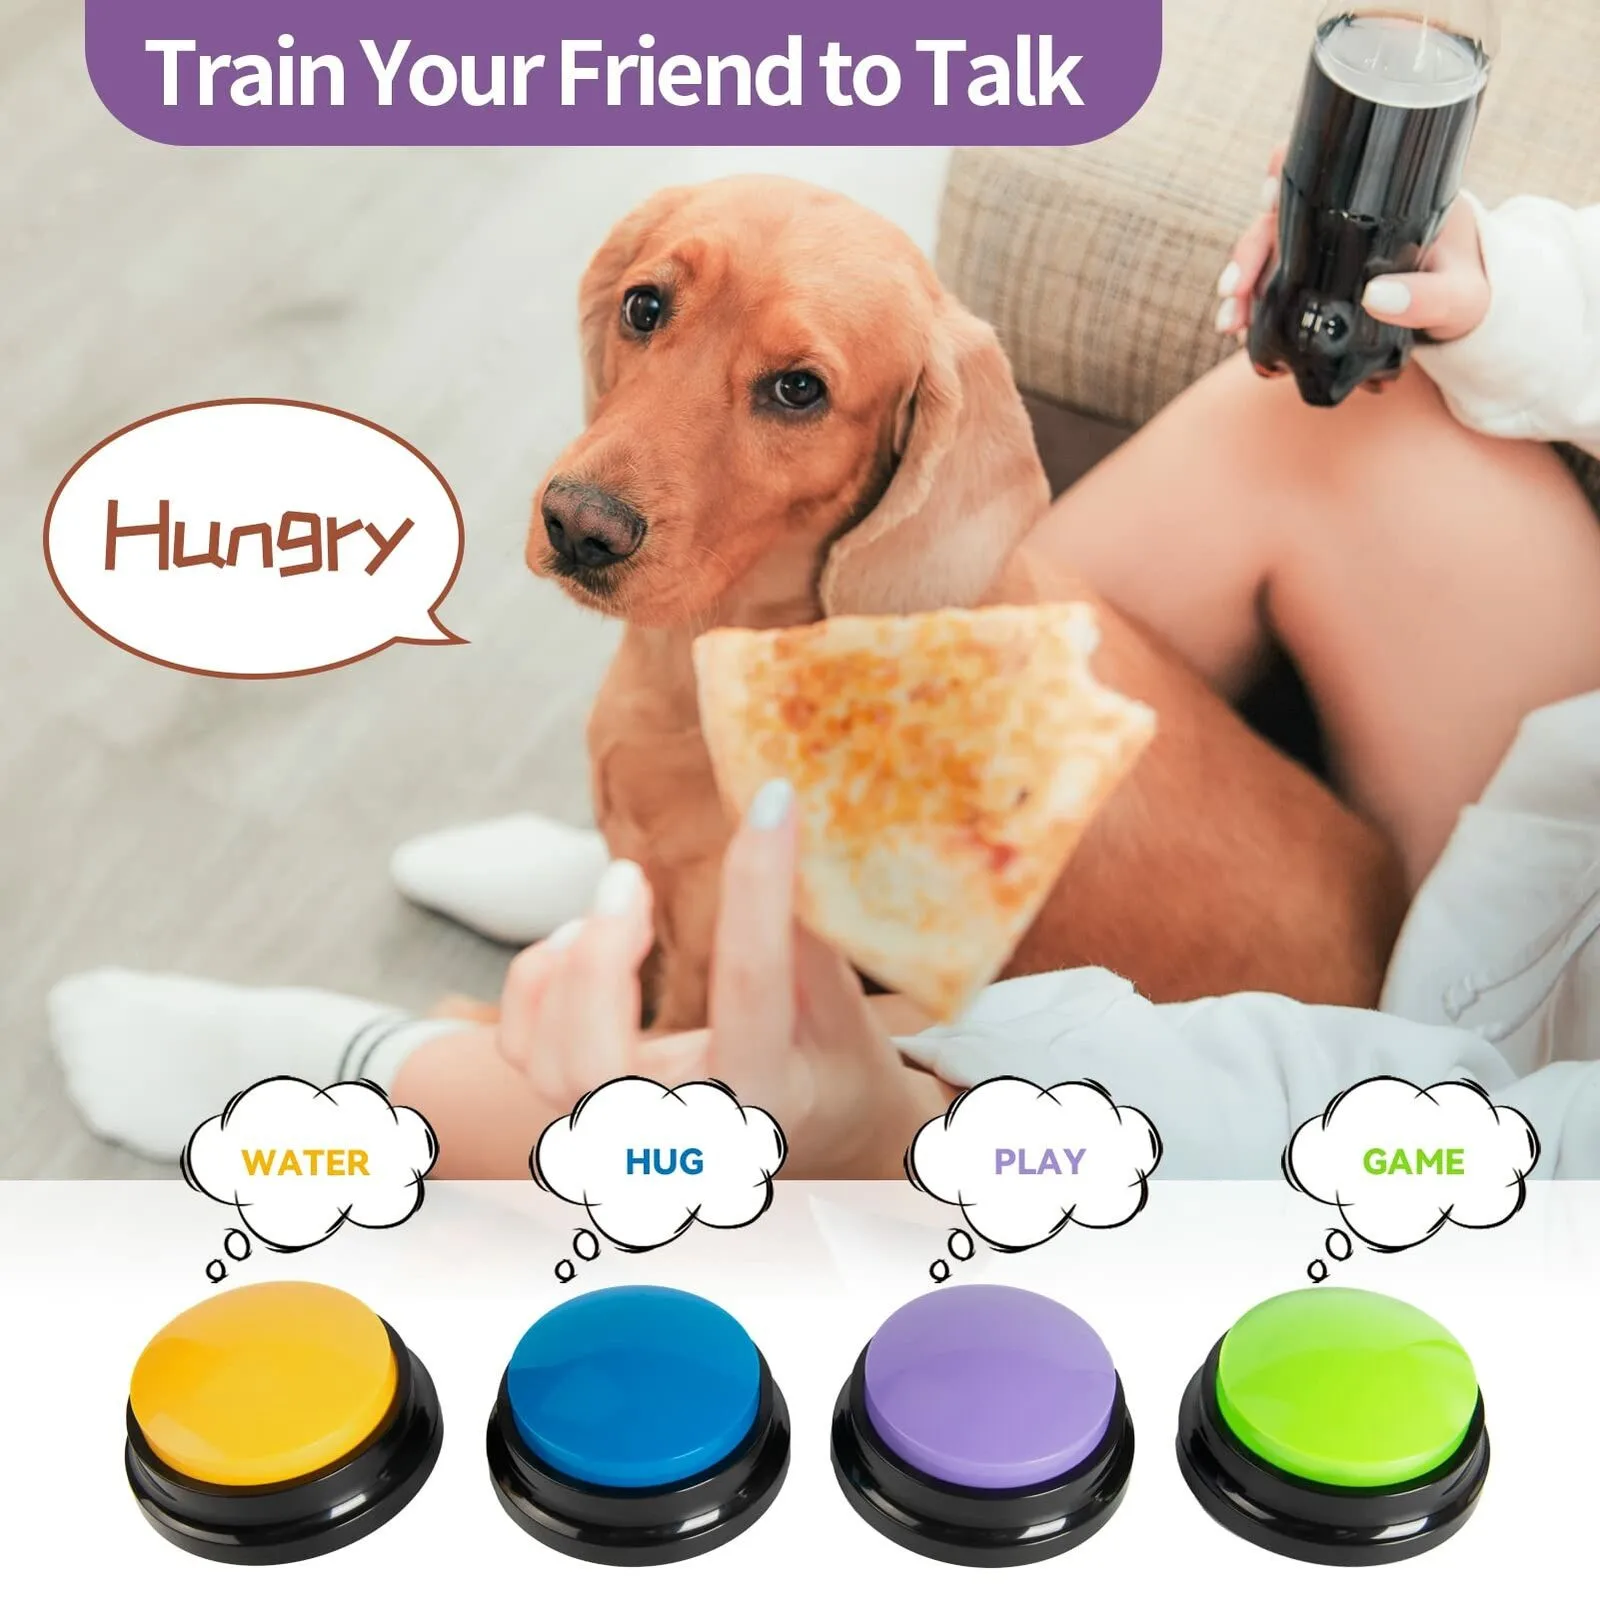 Recordable Talking Easy Carry Voice Recording Sound Button F